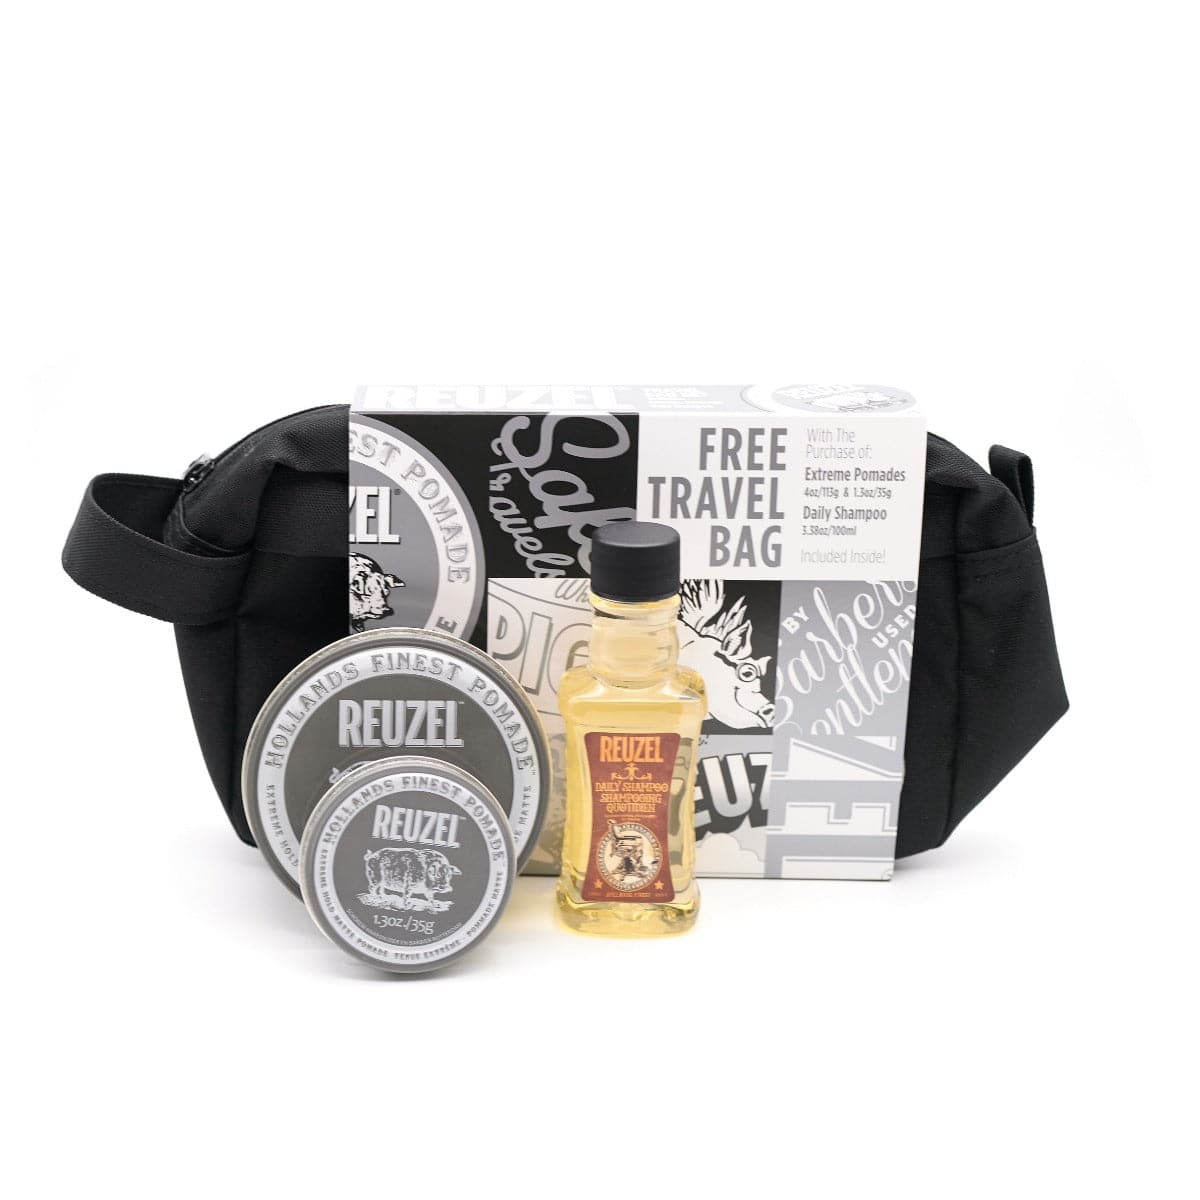 Pigs can fly travel bag set. Extreme hold pomade set. 